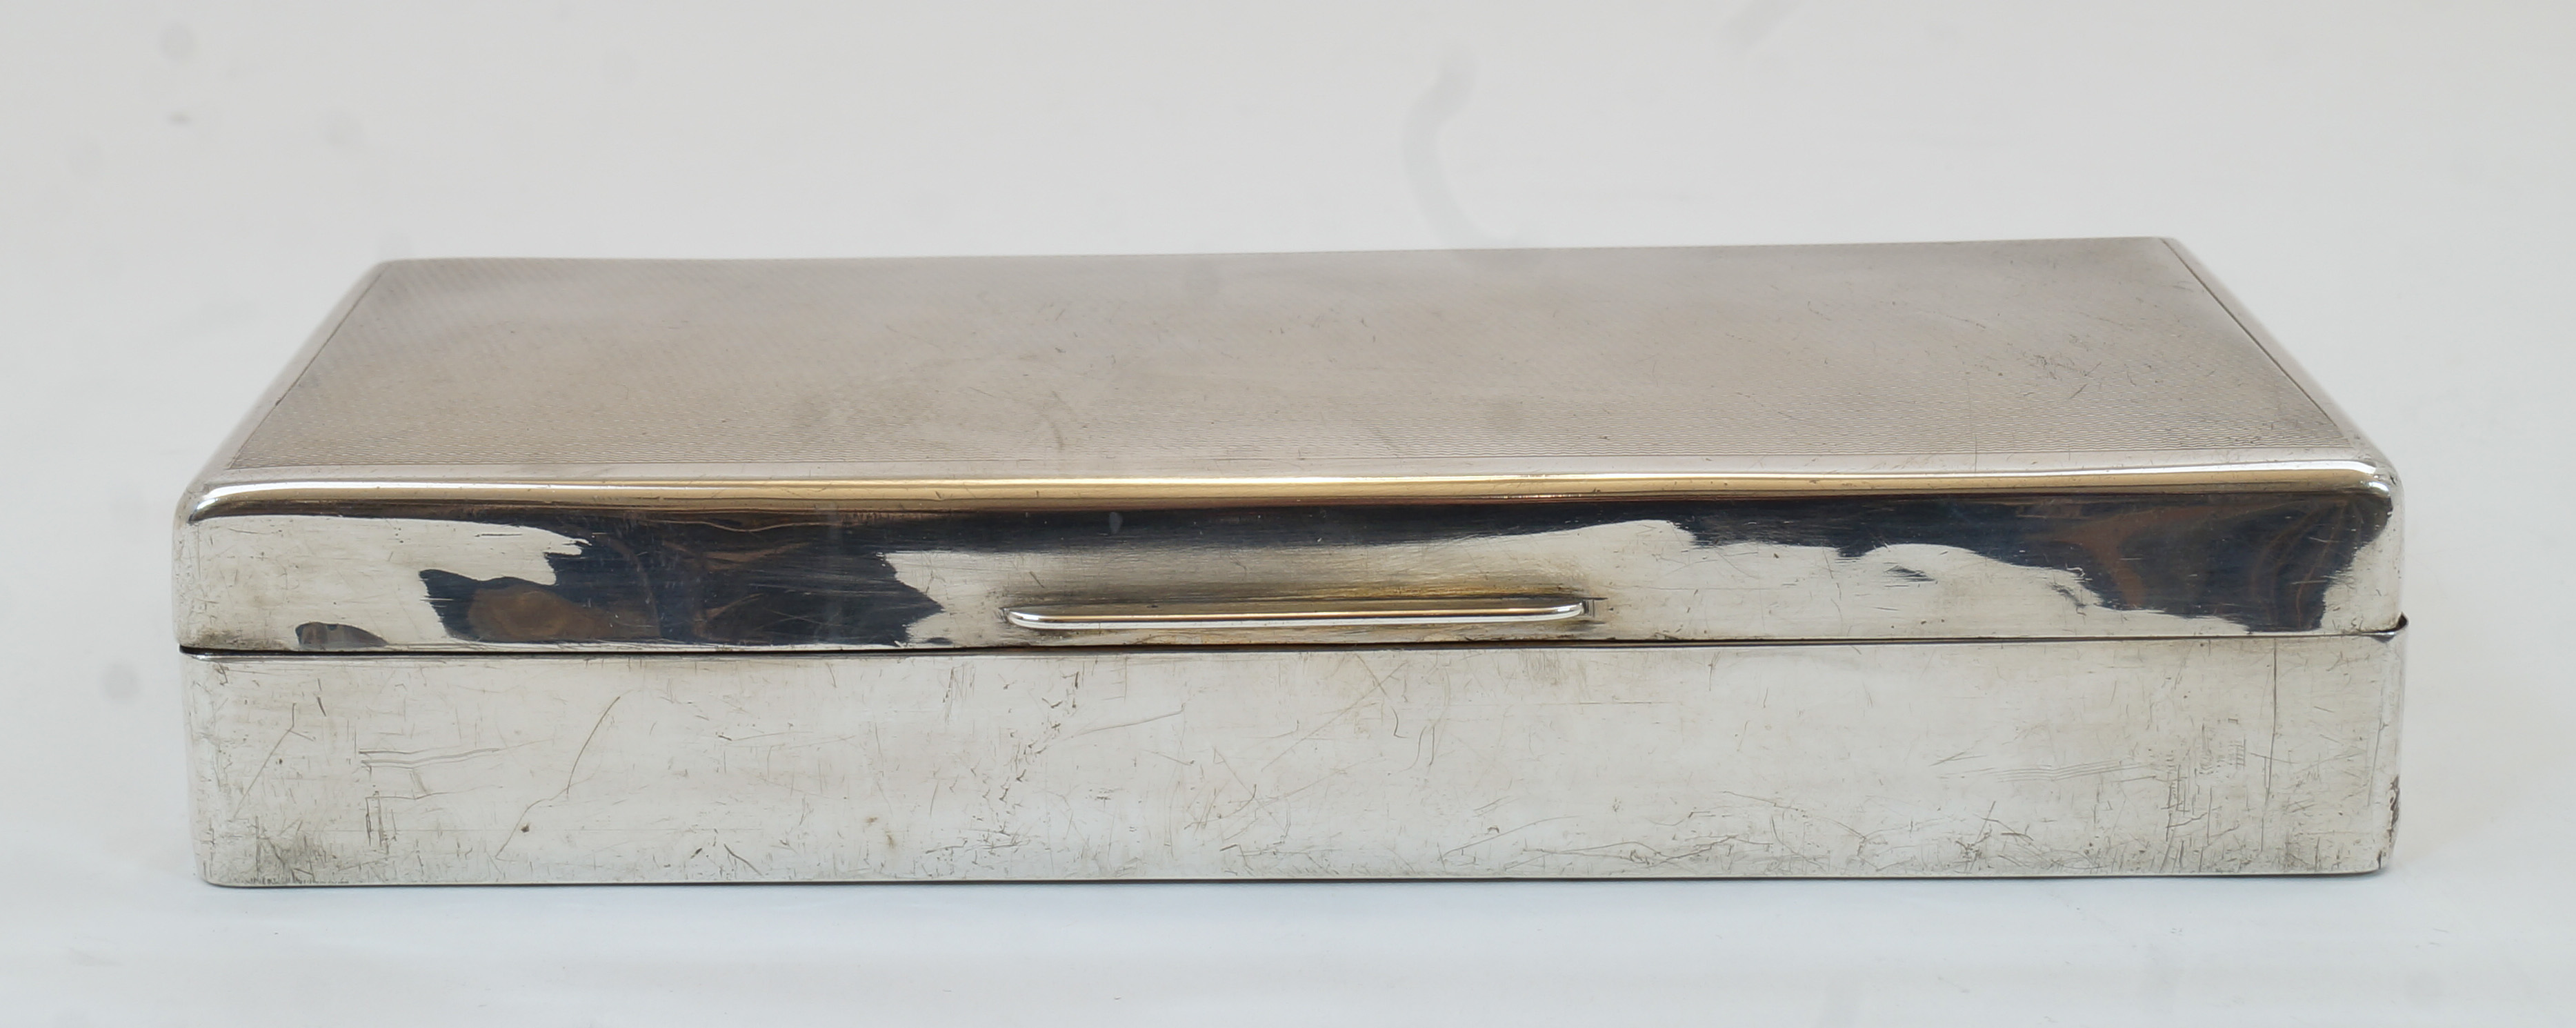 A George VI silver cigarette box, London, 1943, S J Rose & Son, of rectangular form with engine